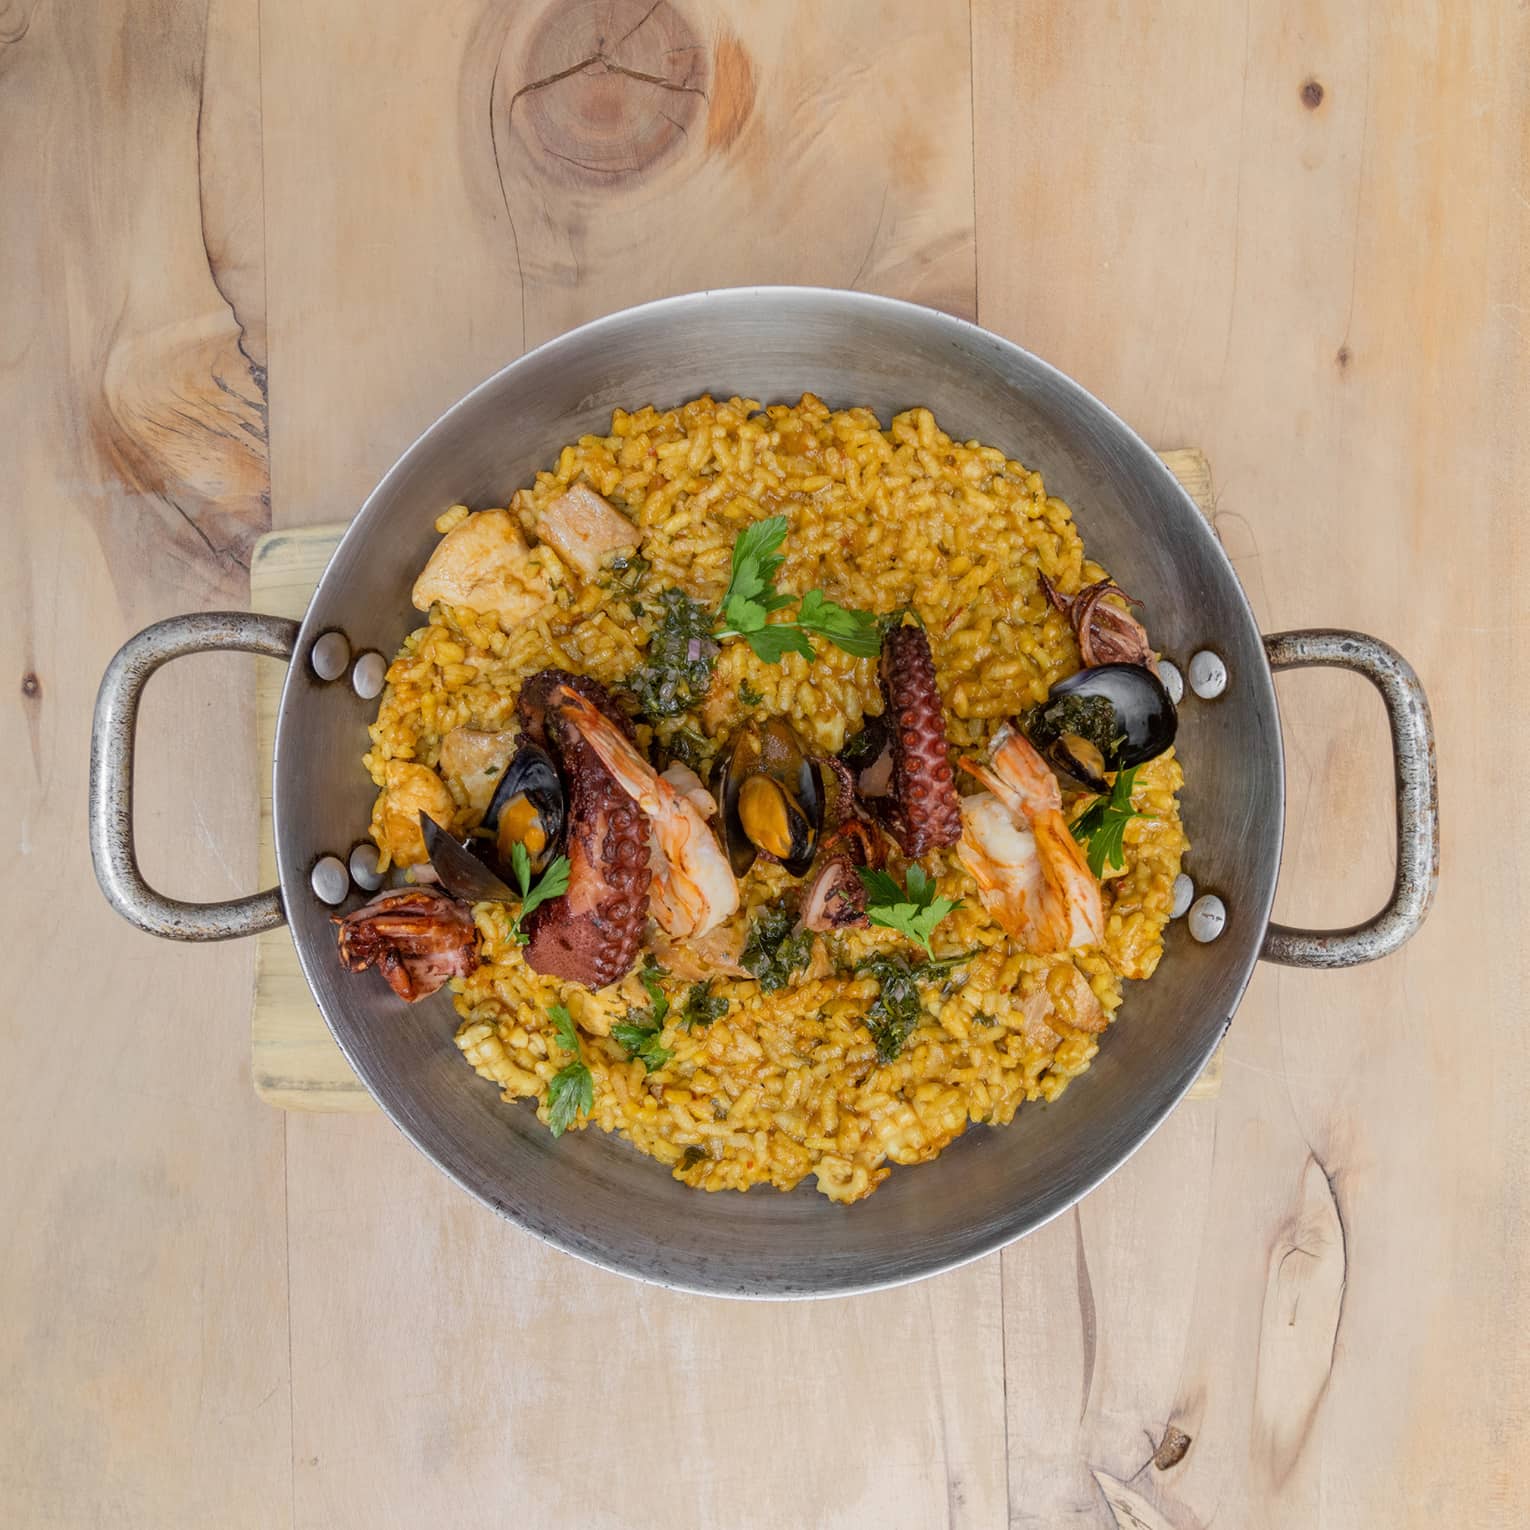 Paella served with yellow rice and sliced meats.